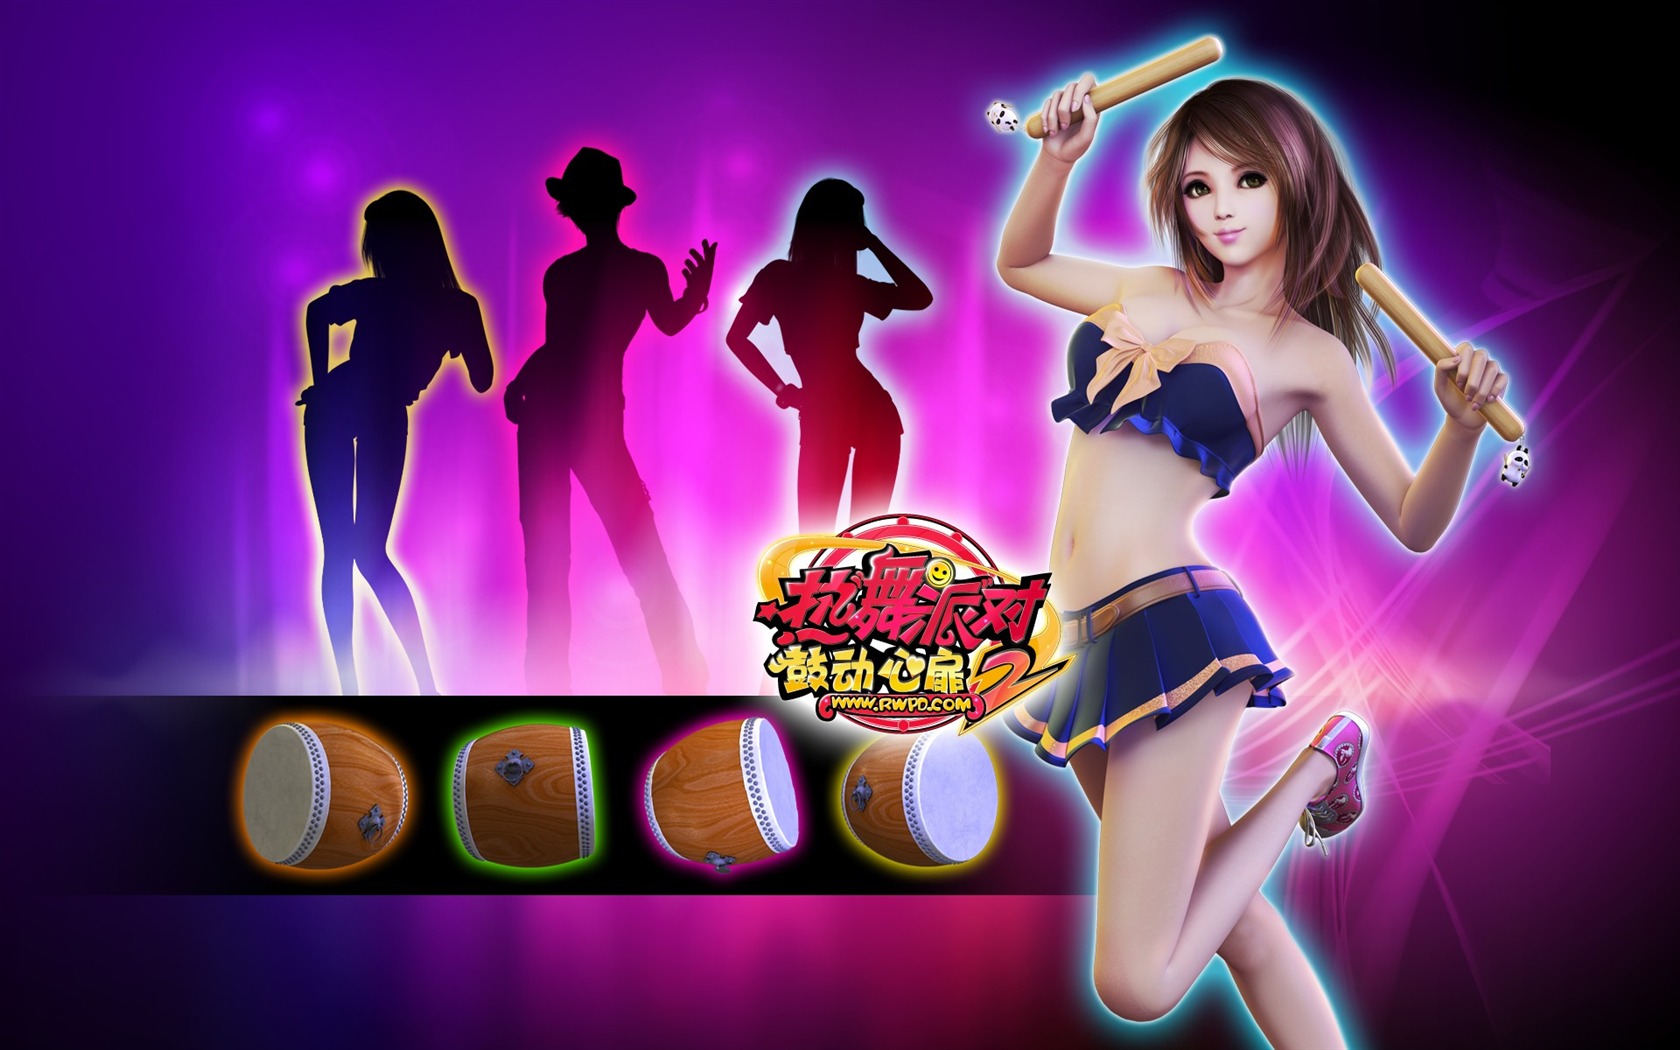 Online game Hot Dance Party II official wallpapers #15 - 1680x1050